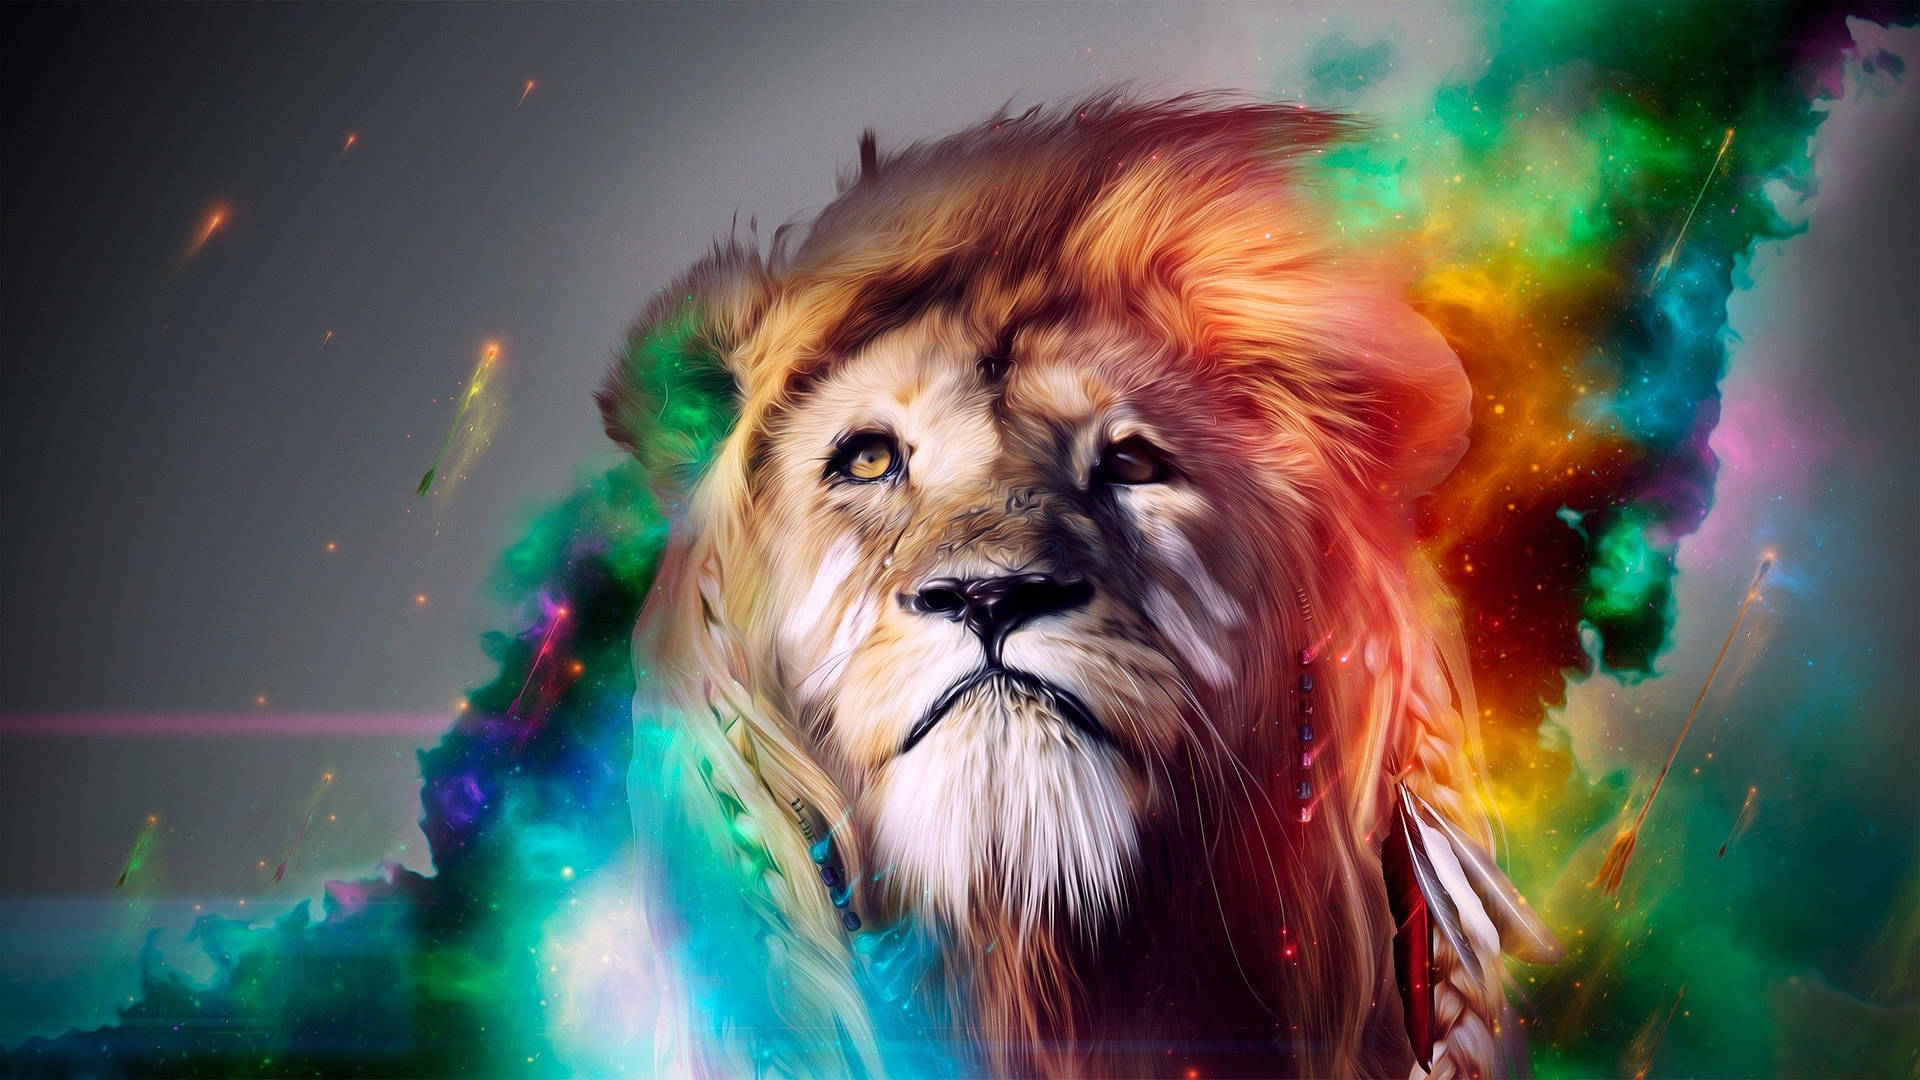 Cool Lion Background Wallpaper